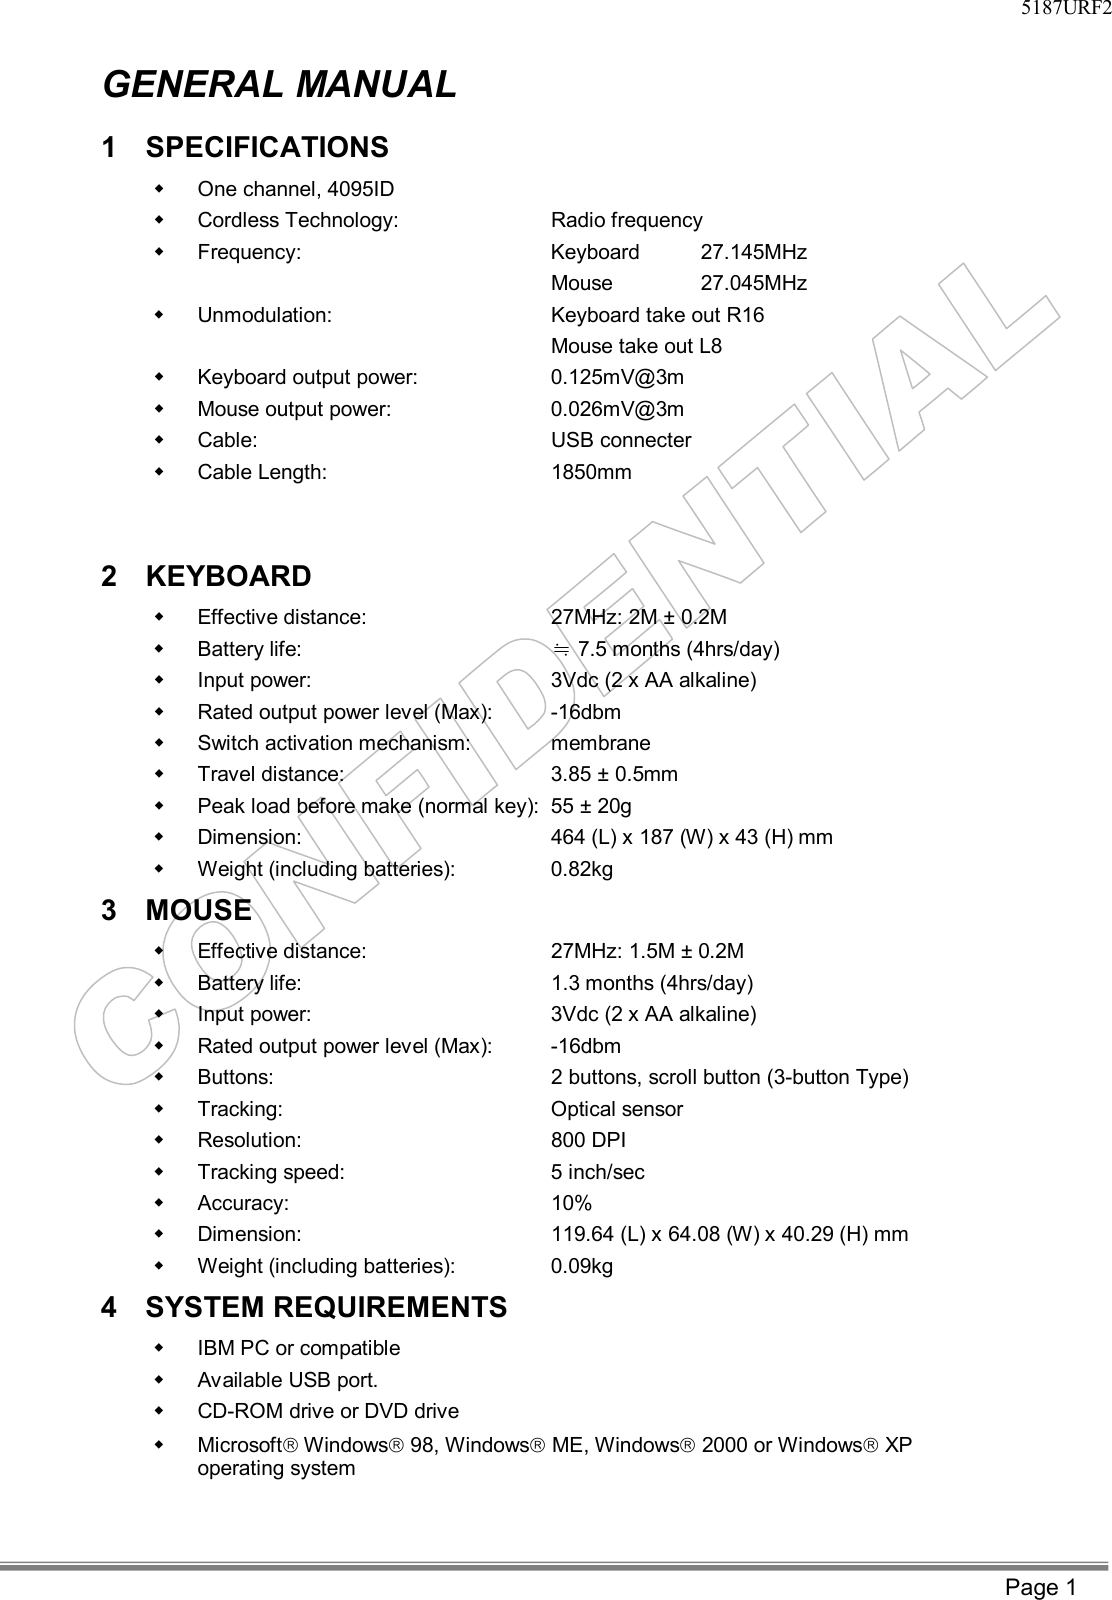     5187URF2  Page 1 GENERAL MANUAL 1 SPECIFICATIONS  w One channel, 4095ID w Cordless Technology:   Radio frequency w Frequency:                           Keyboard  27.145MHz    Mouse       27.045MHz w Unmodulation:   Keyboard take out R16 Mouse take out L8 w Keyboard output power:      0.125mV@3m w Mouse output power:    0.026mV@3m w Cable:        USB connecter w Cable Length:   1850mm   2 KEYBOARD  w Effective distance:   27MHz: 2M ± 0.2M w Battery life:    7.5 months (4hrs/day)≒ w Input power:   3Vdc (2 x AA alkaline) w Rated output power level (Max):   -16dbm w Switch activation mechanism:  membrane w Travel distance:  3.85 ± 0.5mm w Peak load before make (normal key): 55 ± 20g w Dimension:   464 (L) x 187 (W) x 43 (H) mm w Weight (including batteries):   0.82kg 3 MOUSE  w Effective distance:   27MHz: 1.5M ± 0.2M w Battery life:   1.3 months (4hrs/day) w Input power:   3Vdc (2 x AA alkaline) w Rated output power level (Max):   -16dbm w Buttons:   2 buttons, scroll button (3-button Type) w Tracking:   Optical sensor w Resolution:   800 DPI w Tracking speed:   5 inch/sec w Accuracy:   10% w Dimension:   119.64 (L) x 64.08 (W) x 40.29 (H) mm w Weight (including batteries):   0.09kg   4 SYSTEM REQUIREMENTS  w IBM PC or compatible w Available USB port. w CD-ROM drive or DVD drive w Microsoftâ Windowsâ 98, Windowsâ ME, Windowsâ 2000 or Windowsâ XP operating system  